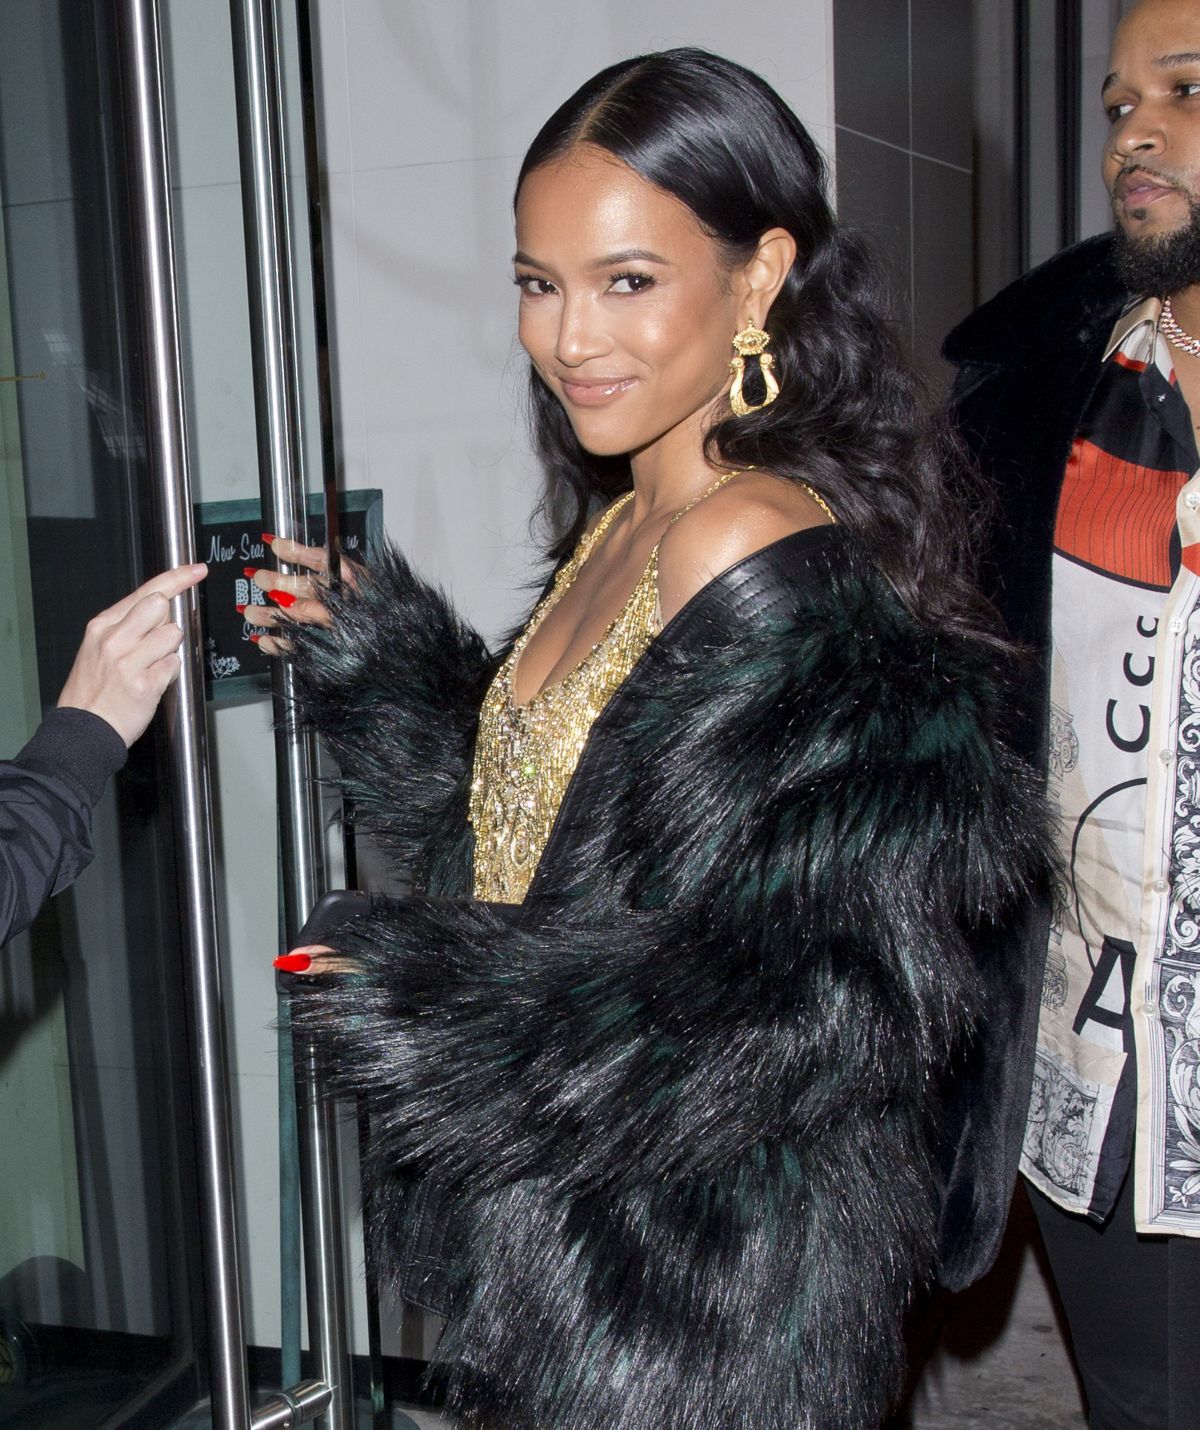 KARRUECHE TRAN at Diddy’s Ciroc Vodka Christmas Party in West Hollywood ...